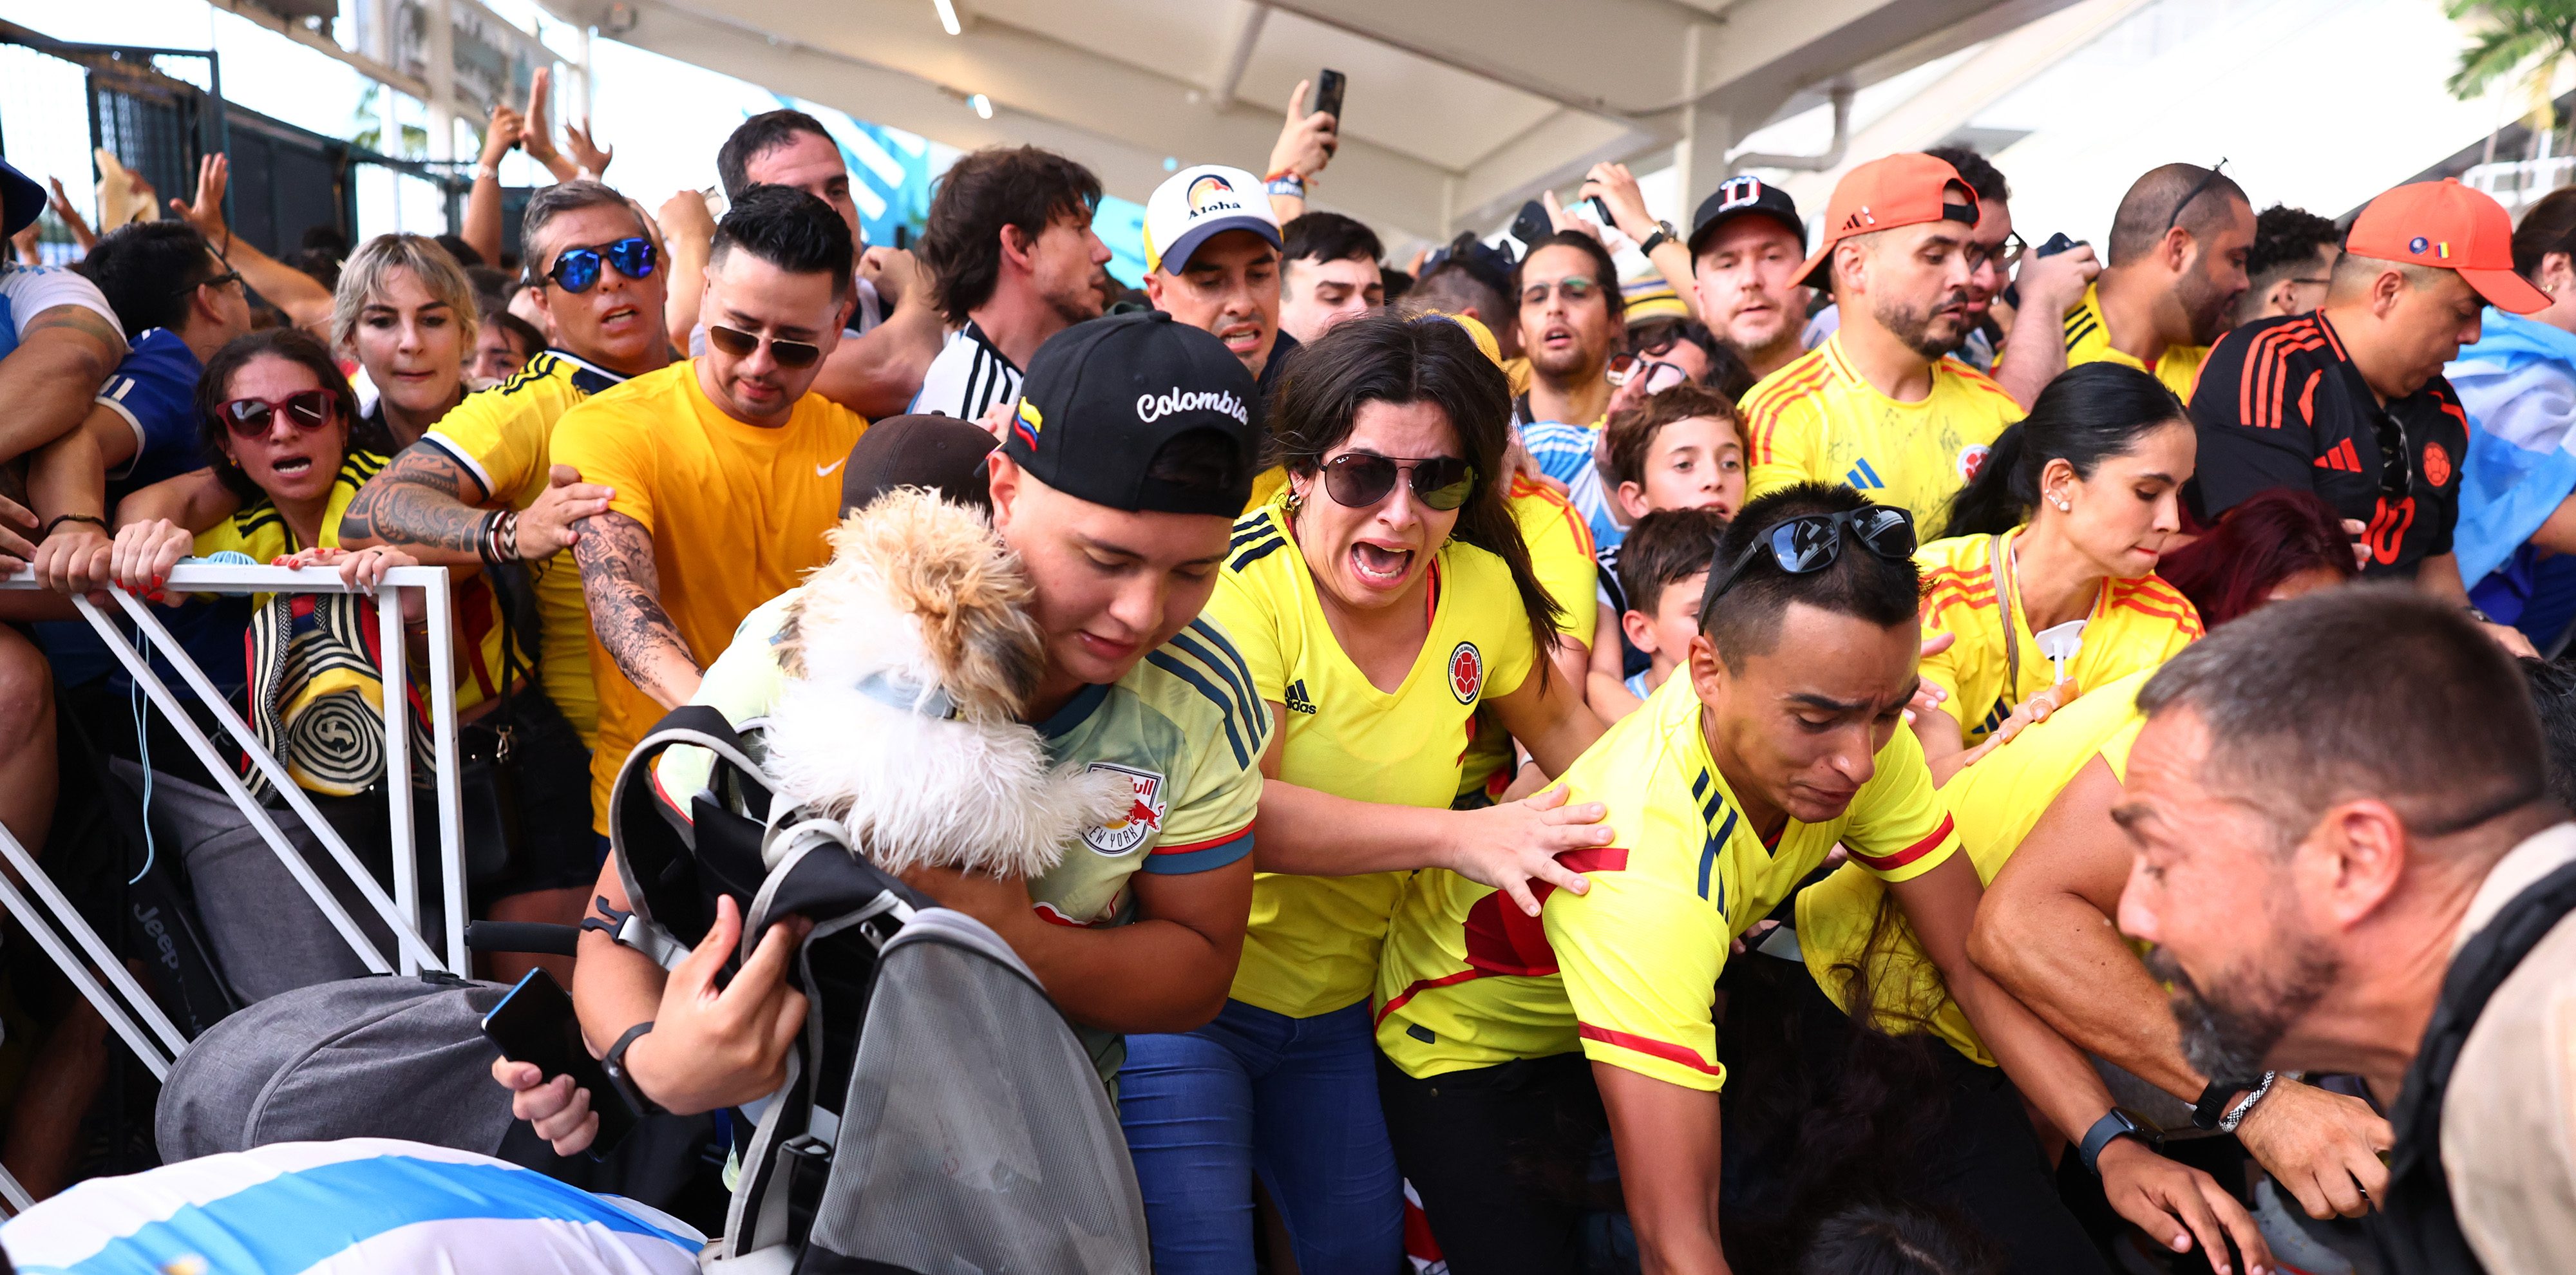 Colombian fans appear to use vents to get into Hard Rock Stadium for Copa America final